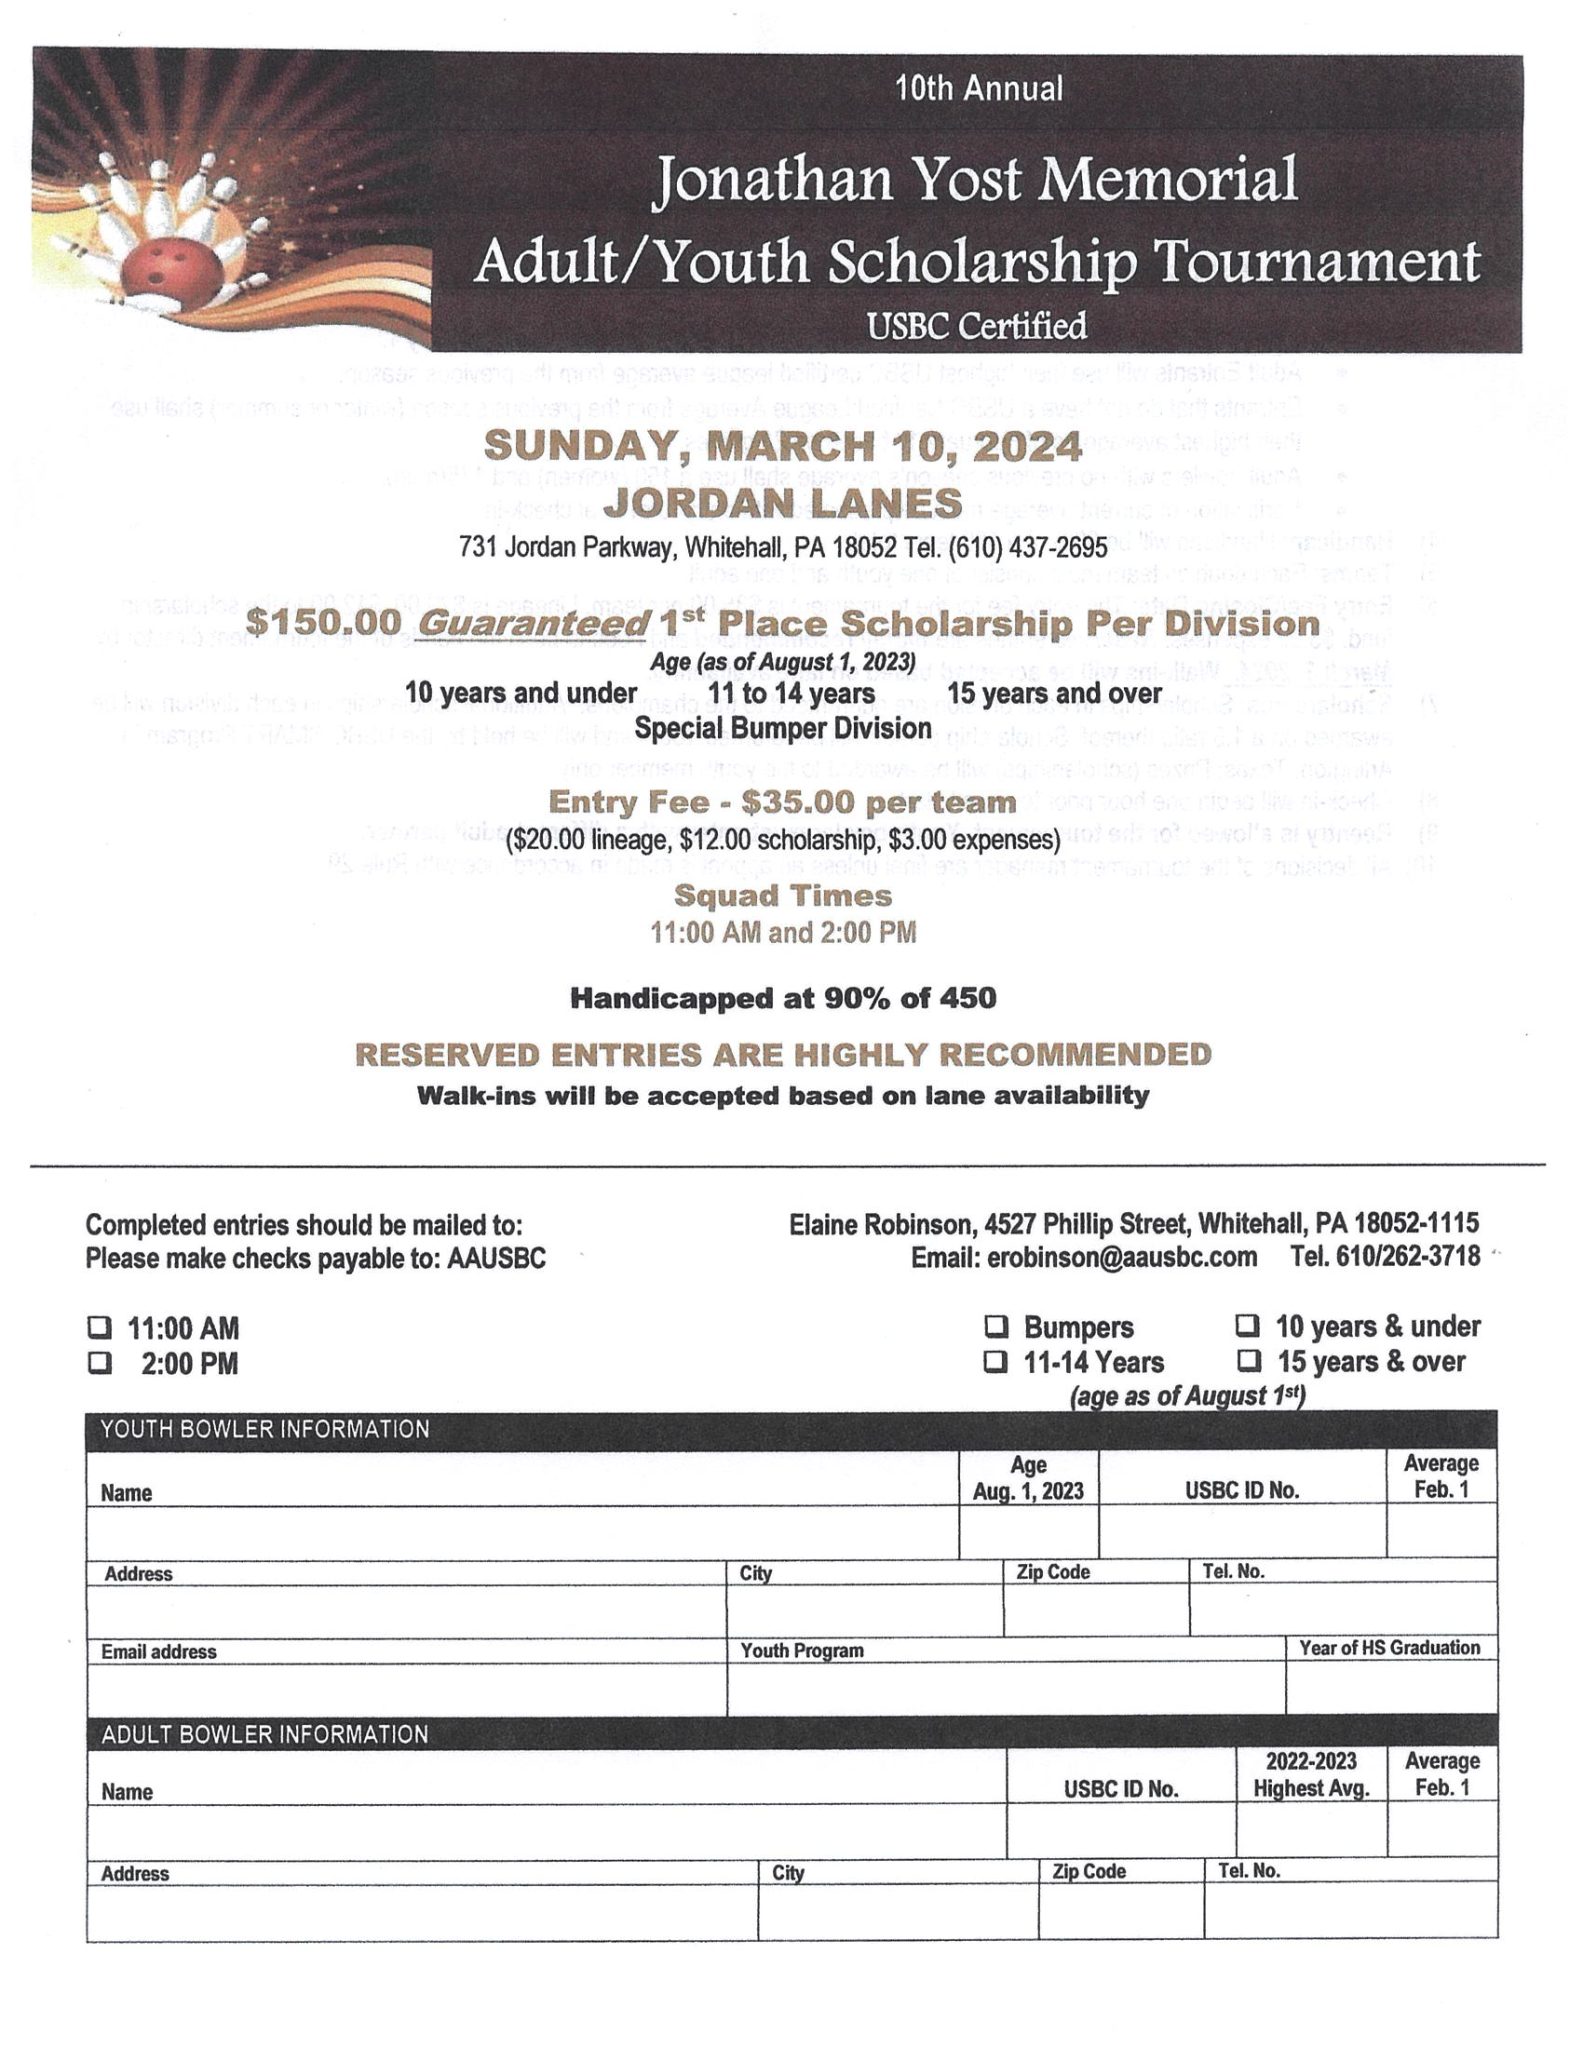 10th Annual Jonathan Yost Memorial Adult / Youth Scholarship Tournament 22